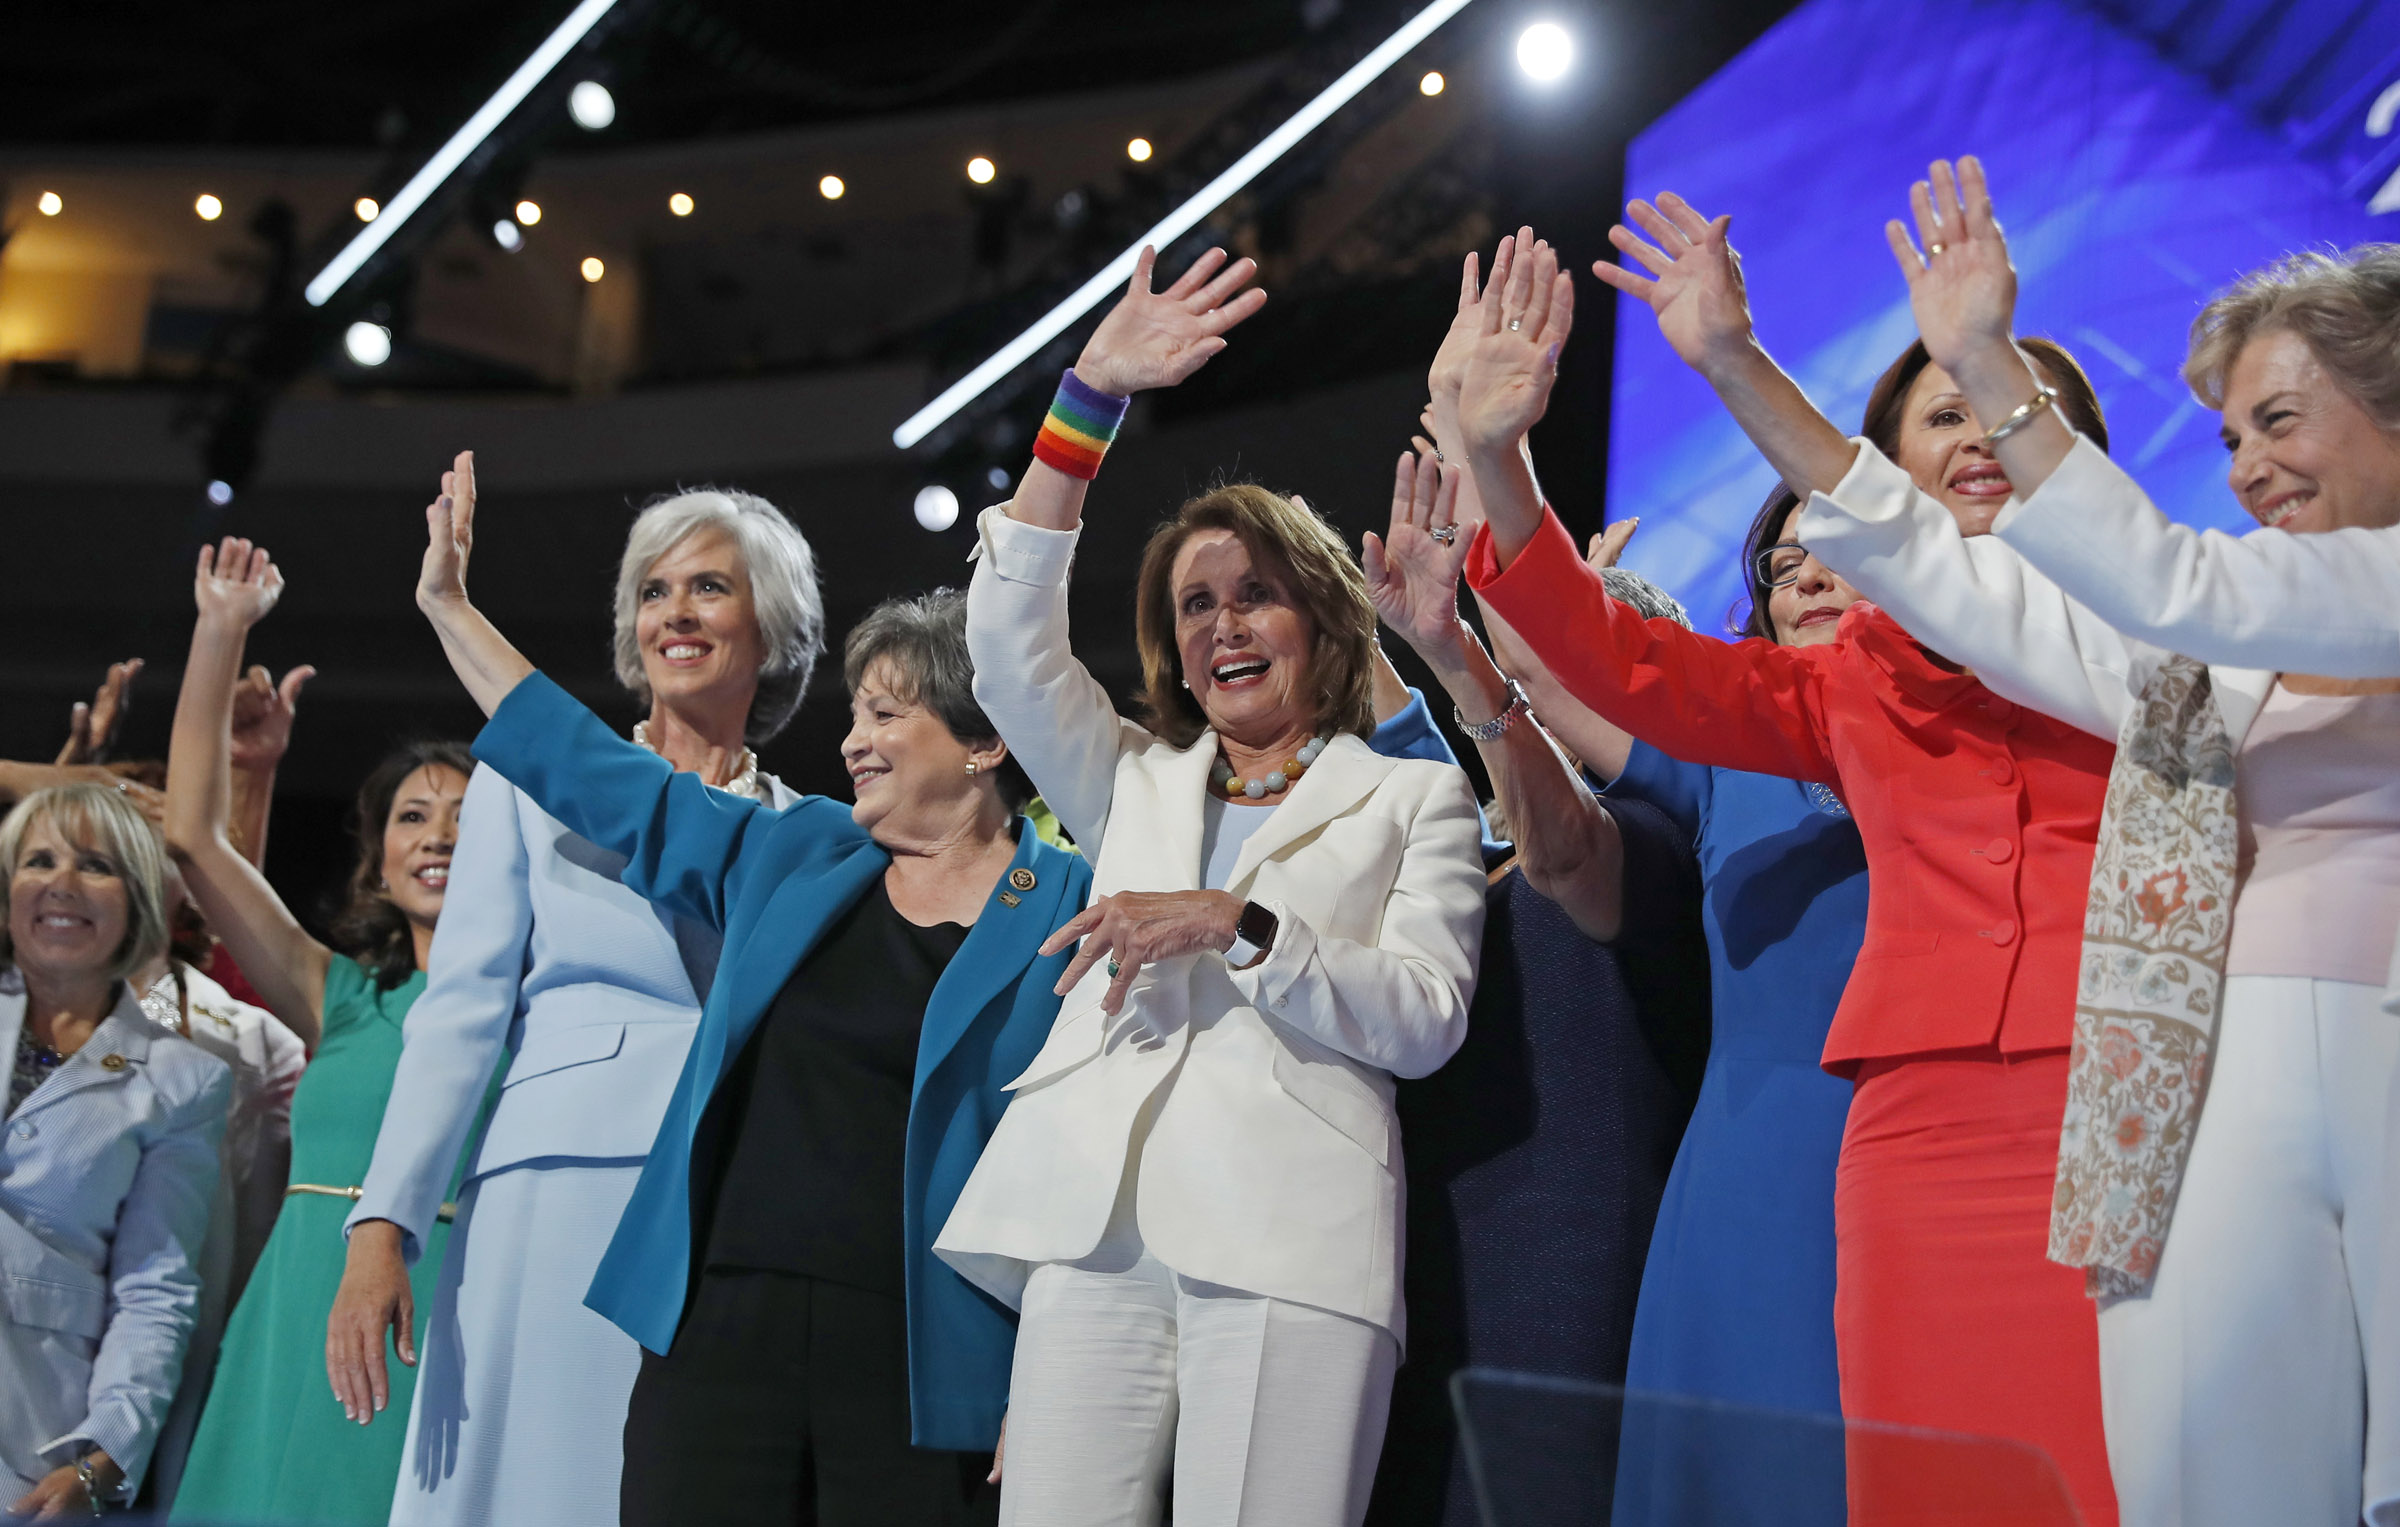 GALLERY: Democratic National Convention Day 2